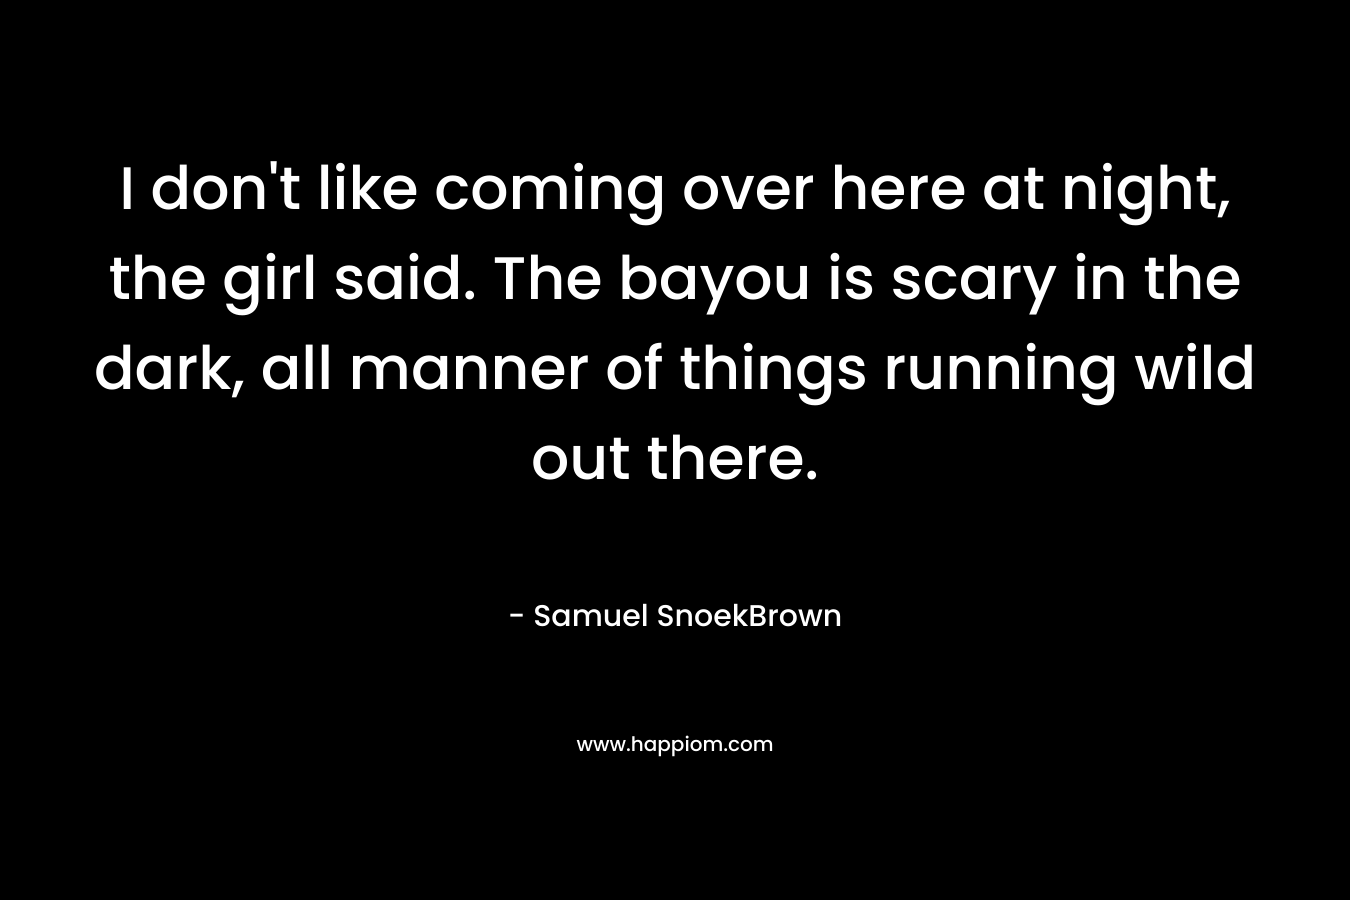 I don't like coming over here at night, the girl said. The bayou is scary in the dark, all manner of things running wild out there.